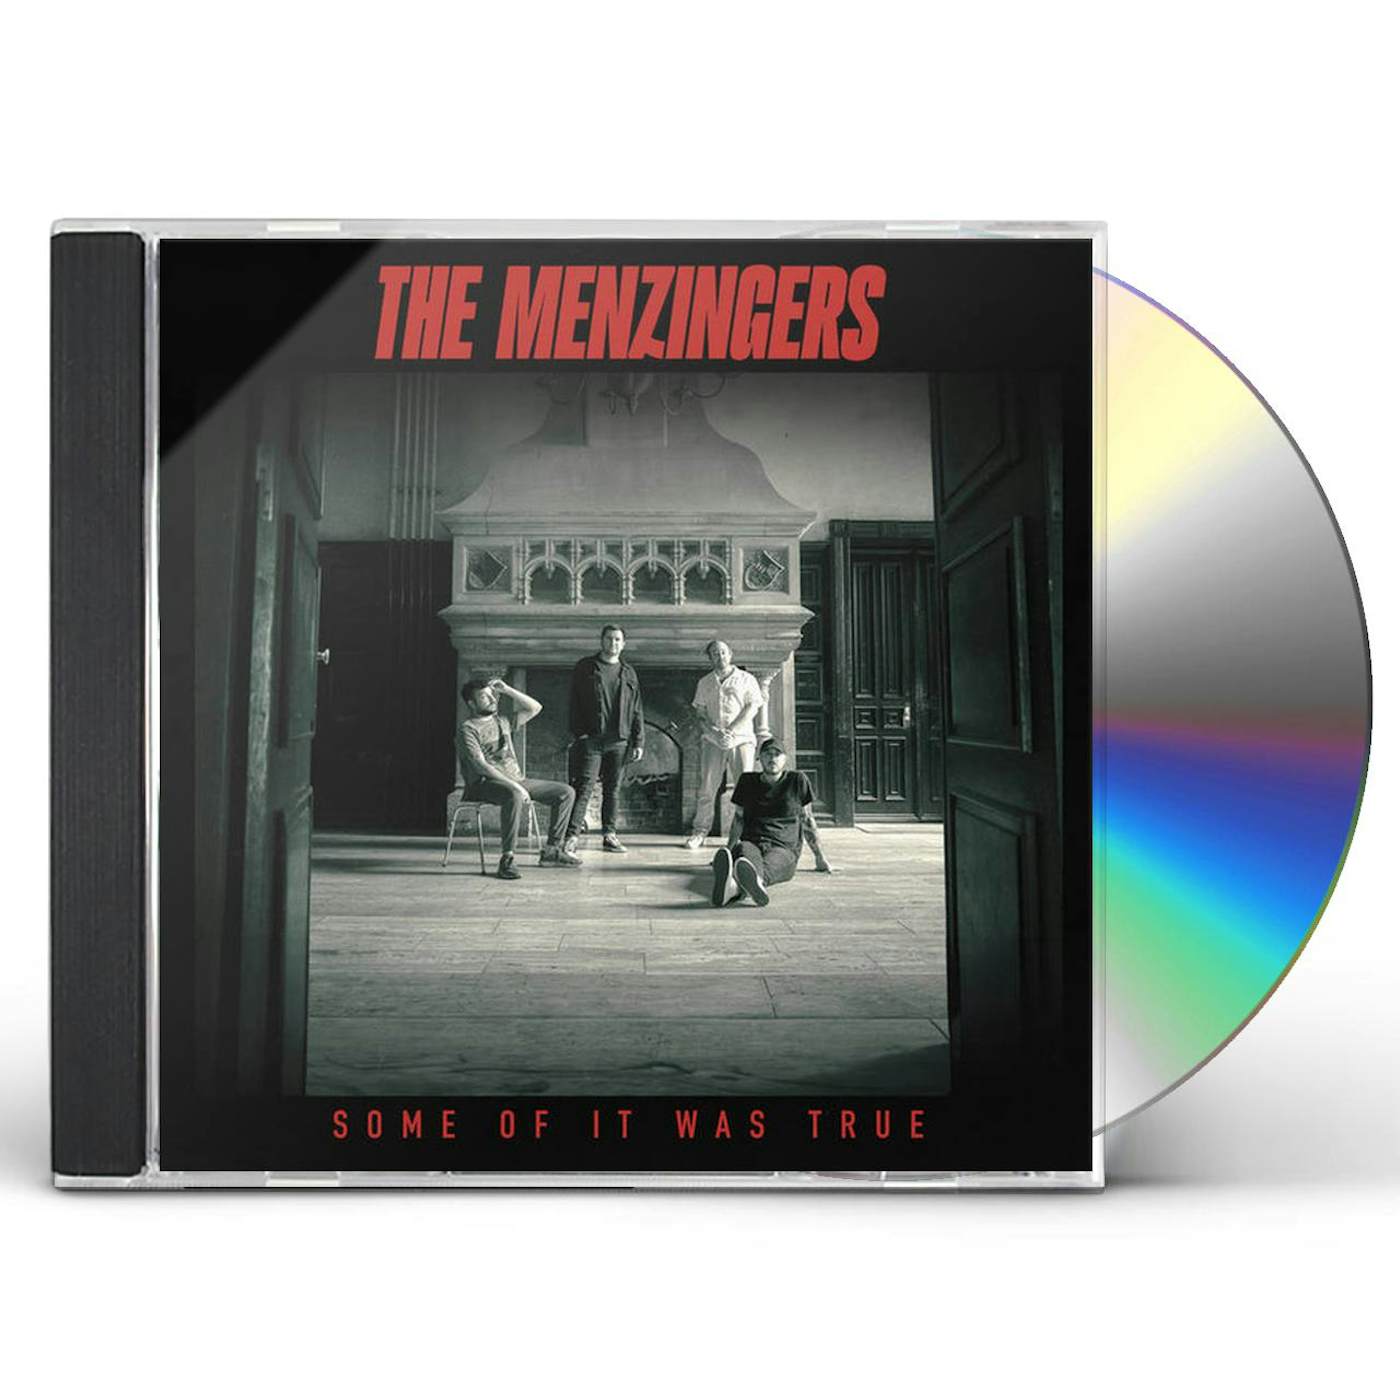 The Menzingers SOME OF IT WAS TRUE CD